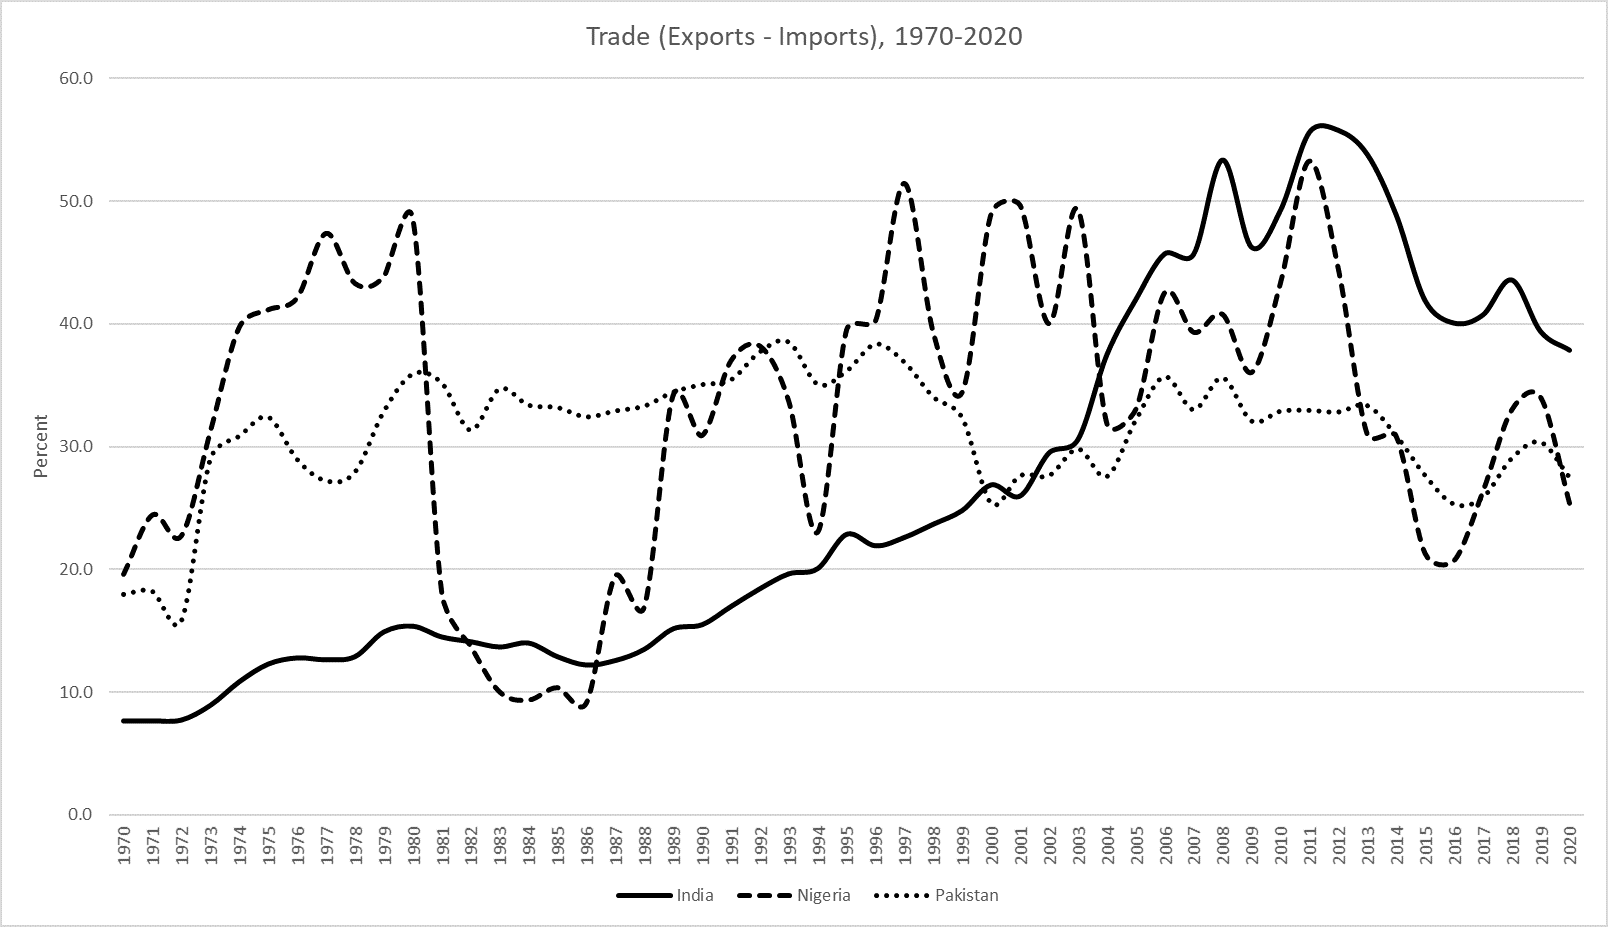 Net exports as a percentage of GDP for India, Nigeria, and Pakistan, 1970-2020. While India's net exports have been rising, the other countries' have fluctuated but not increased nor decreased significantly.